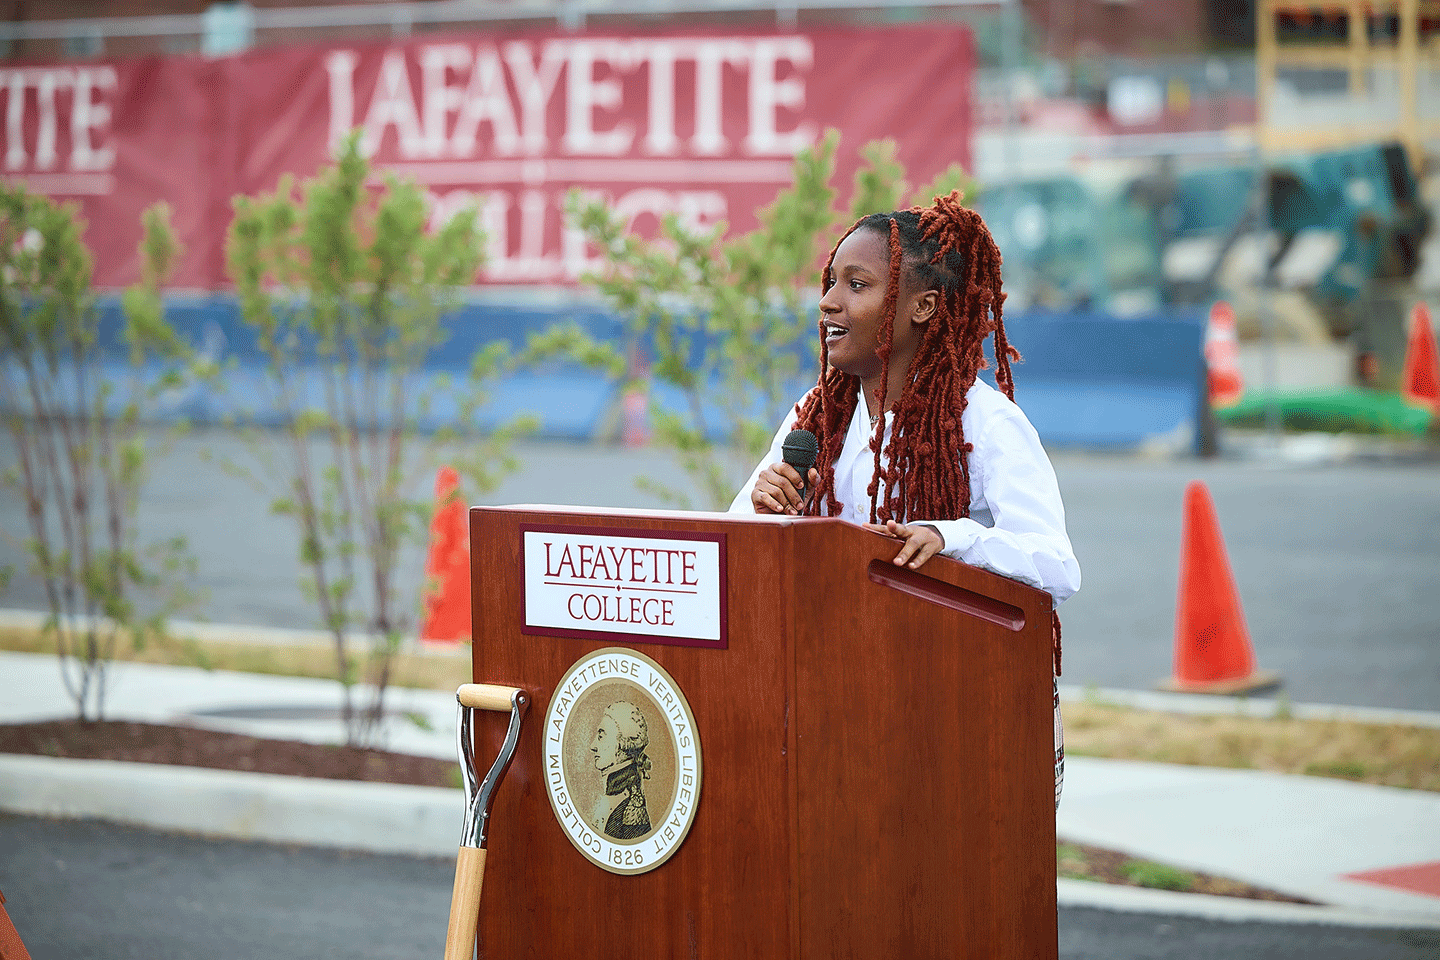 Jada Peters '24 speaks at a podium during a groundbreaking. She is holding a microphone.